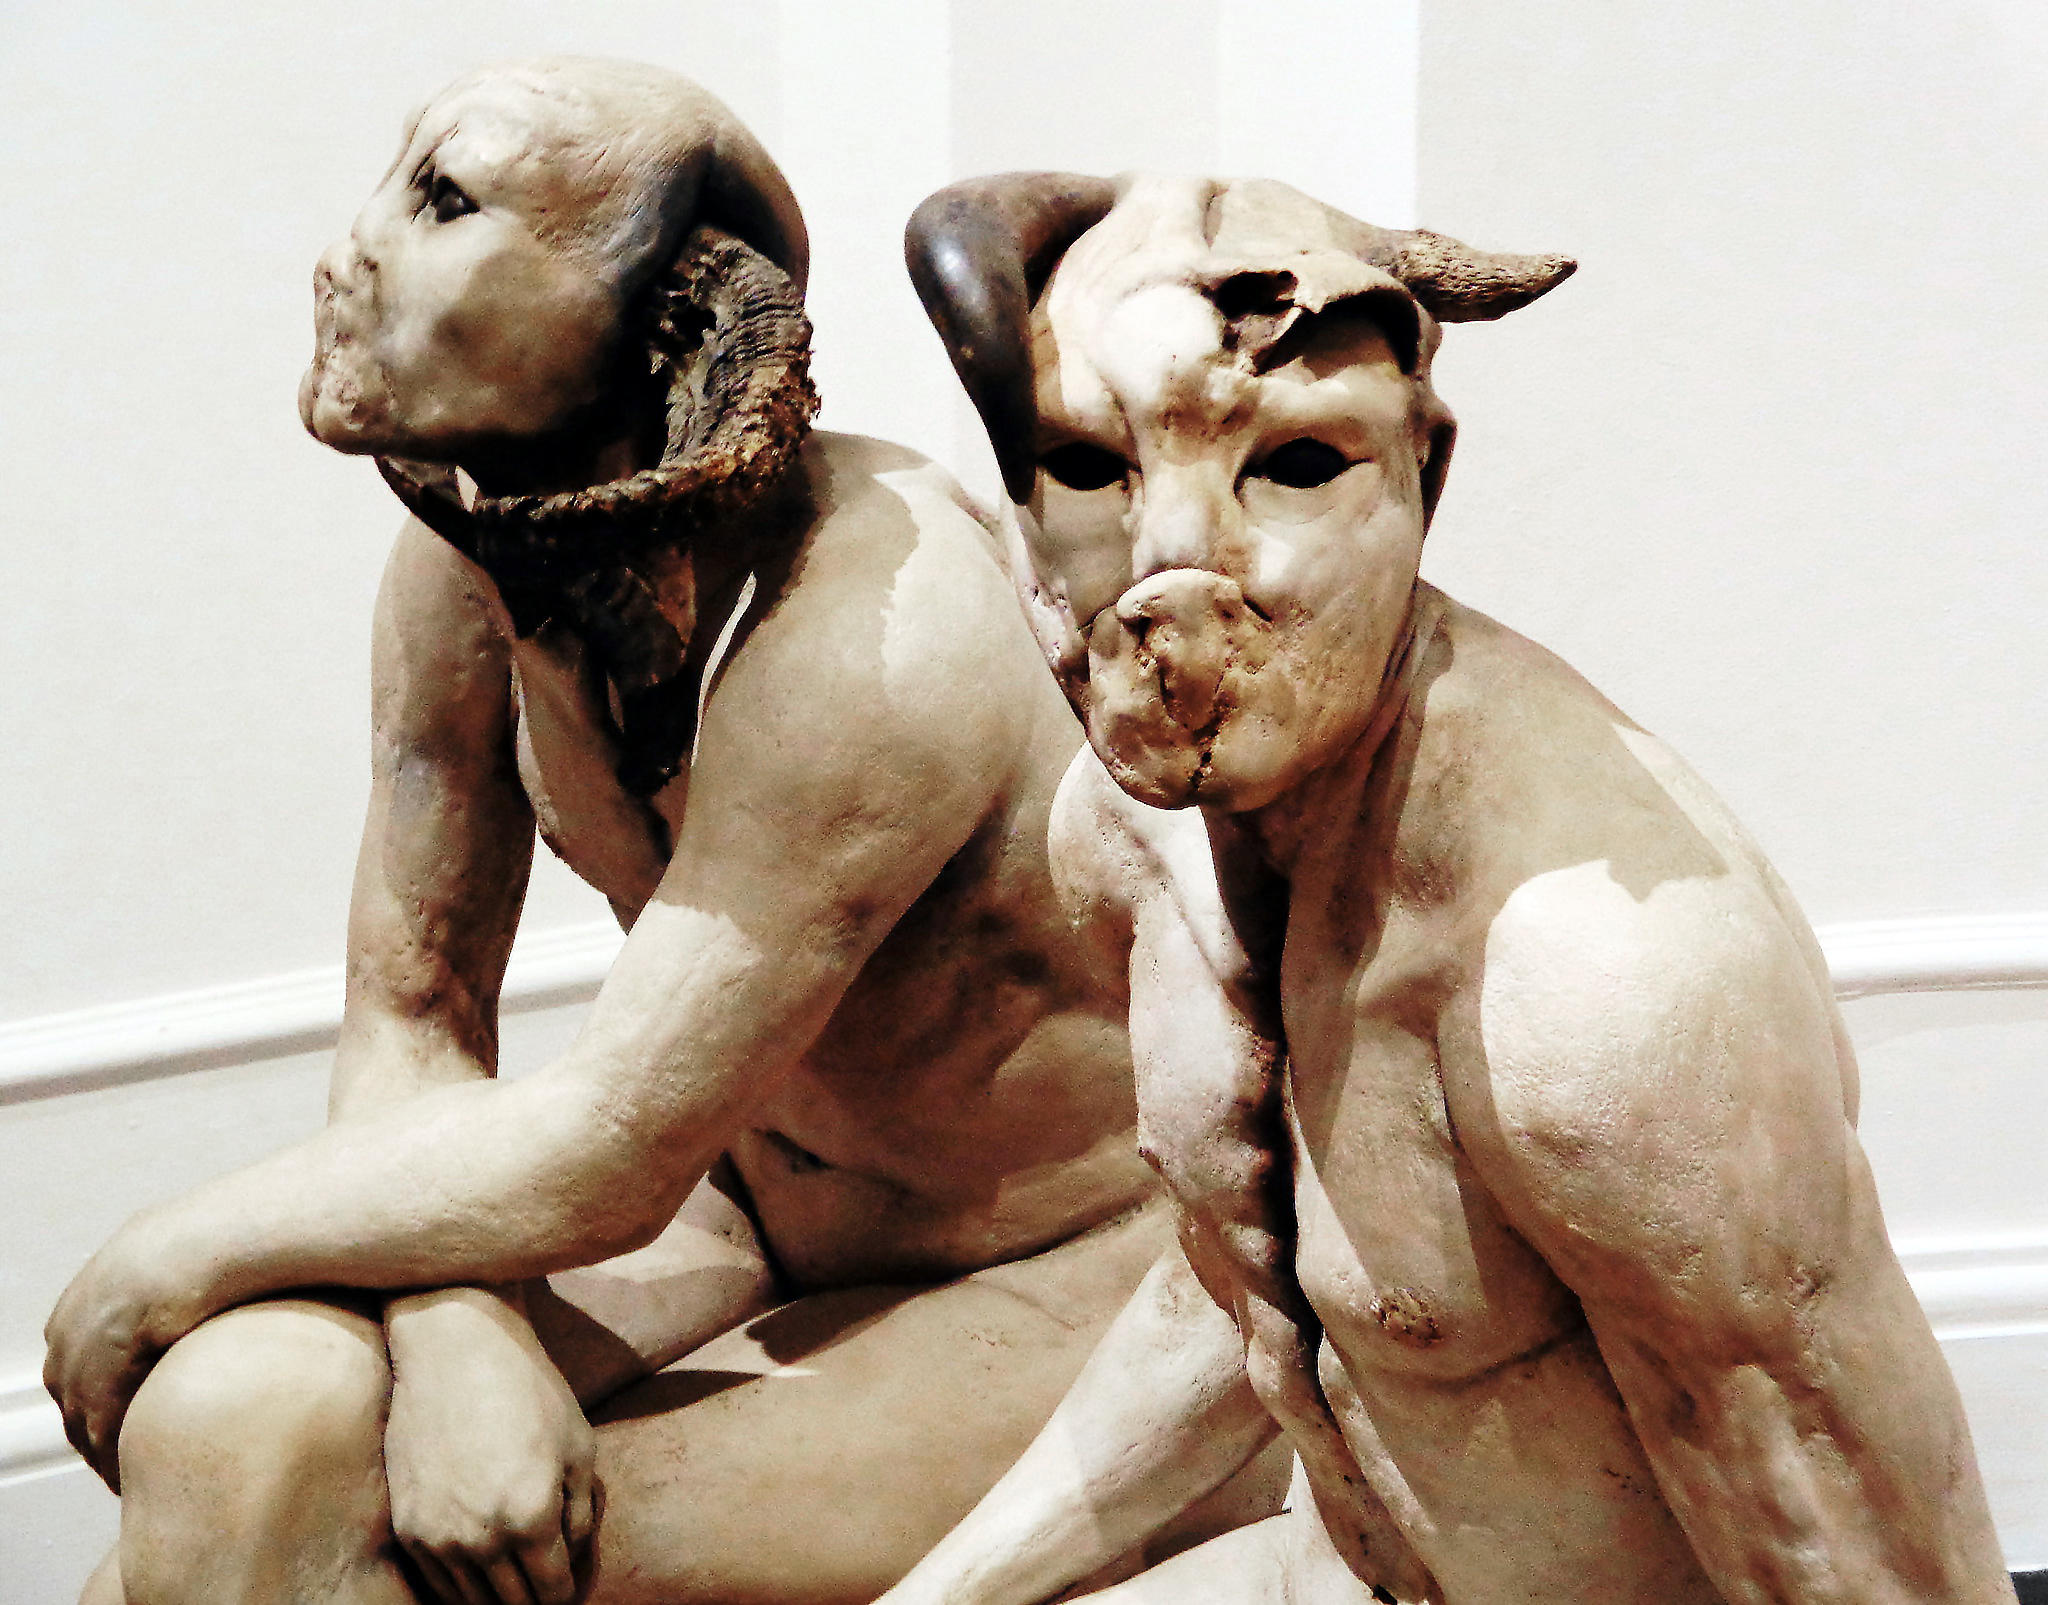 Jane Alexander, Butcher Boys, 1985/86, mixed media (Iziko South African National Gallery, Cape Town, photo: Goggins World, CC BY-NC-ND 2.0)